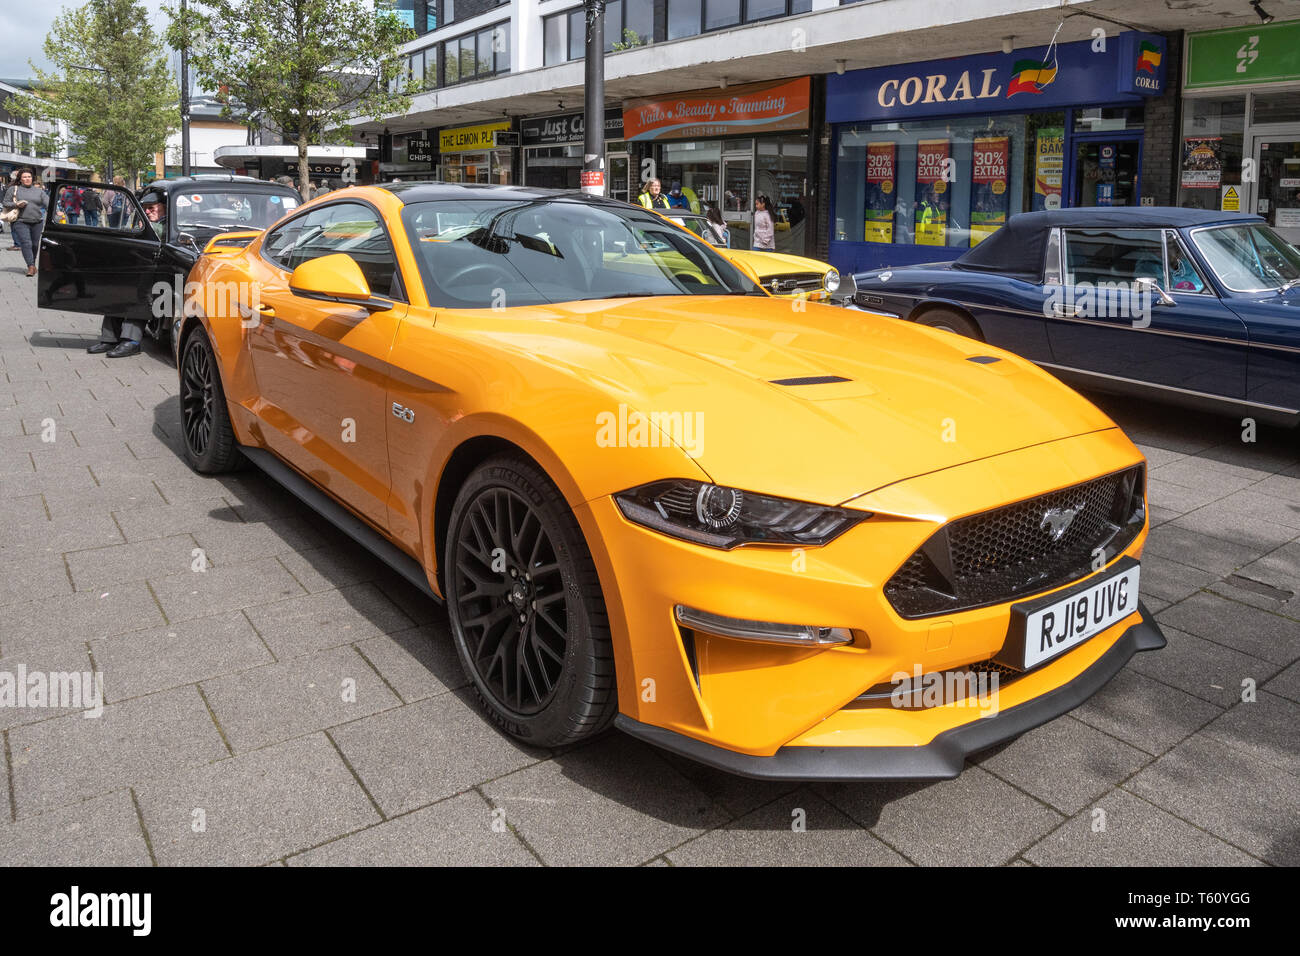 Orange 2019 Ford Mustang sports car at a classic motor vehicle show in the UK Stock Photo